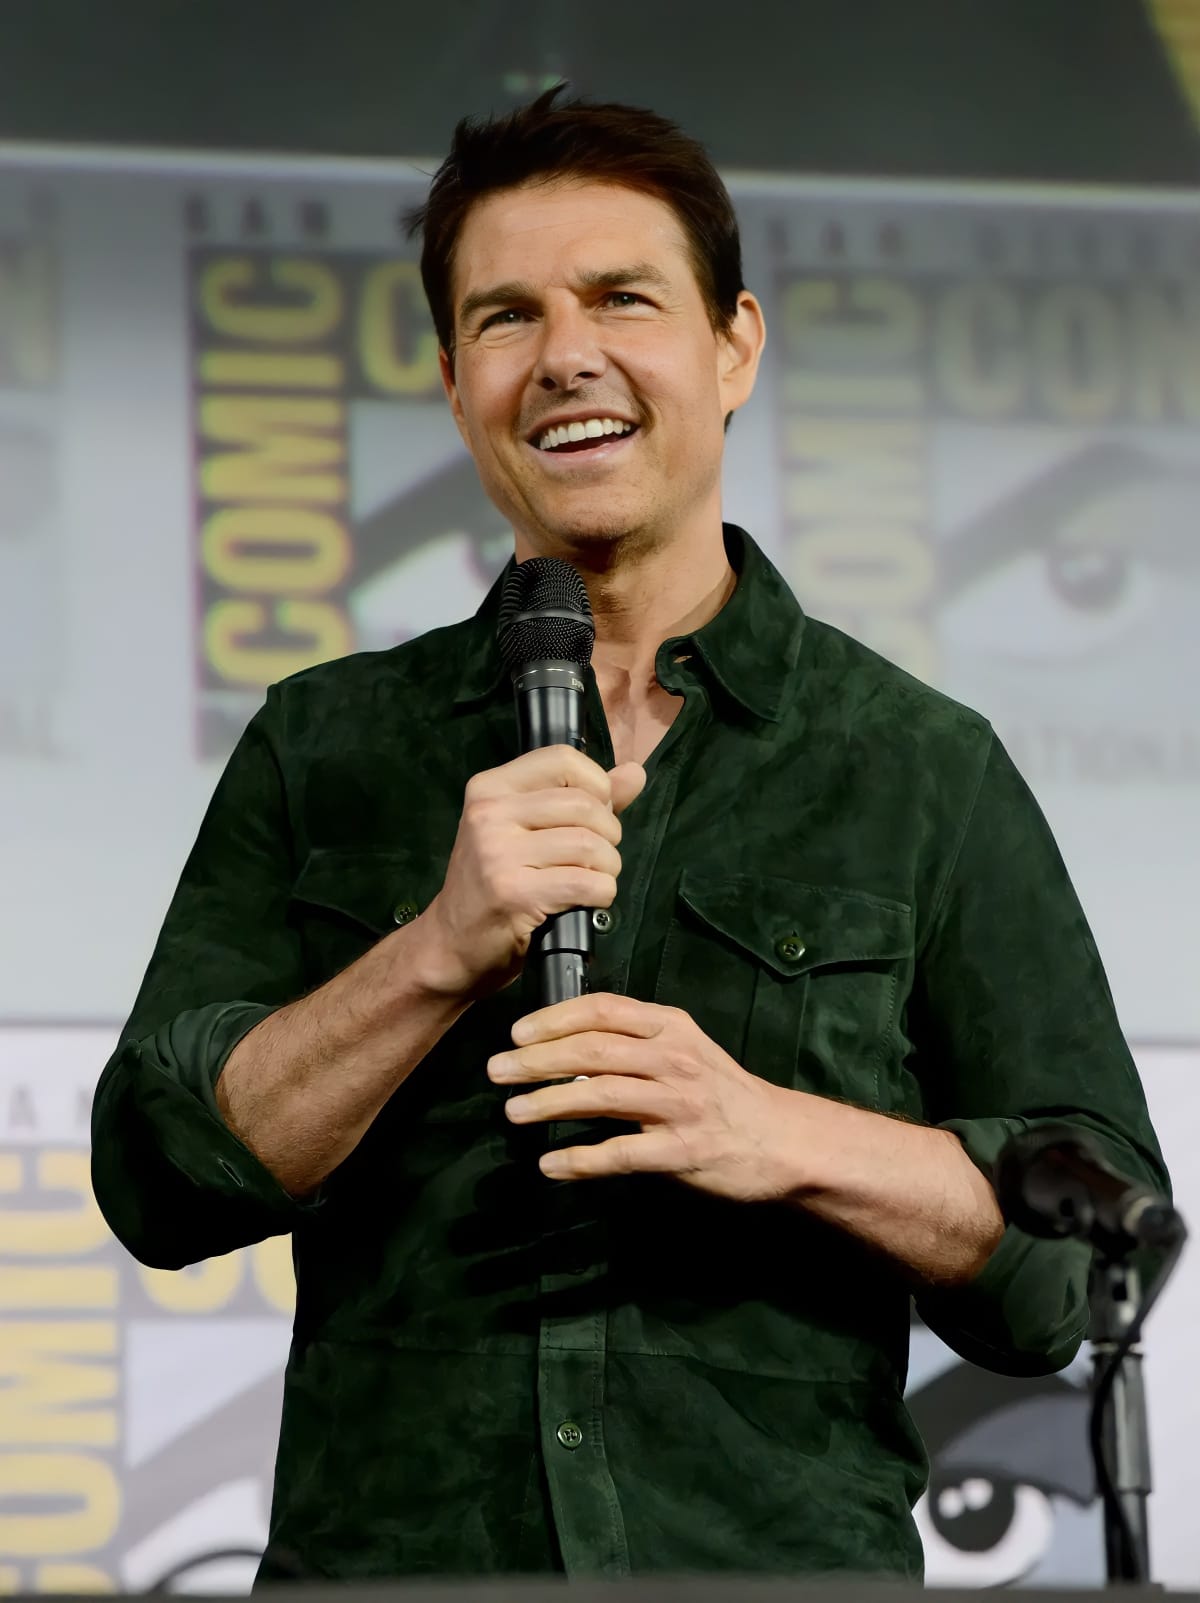 Tom Cruise speaking with a microphone at ComicCon